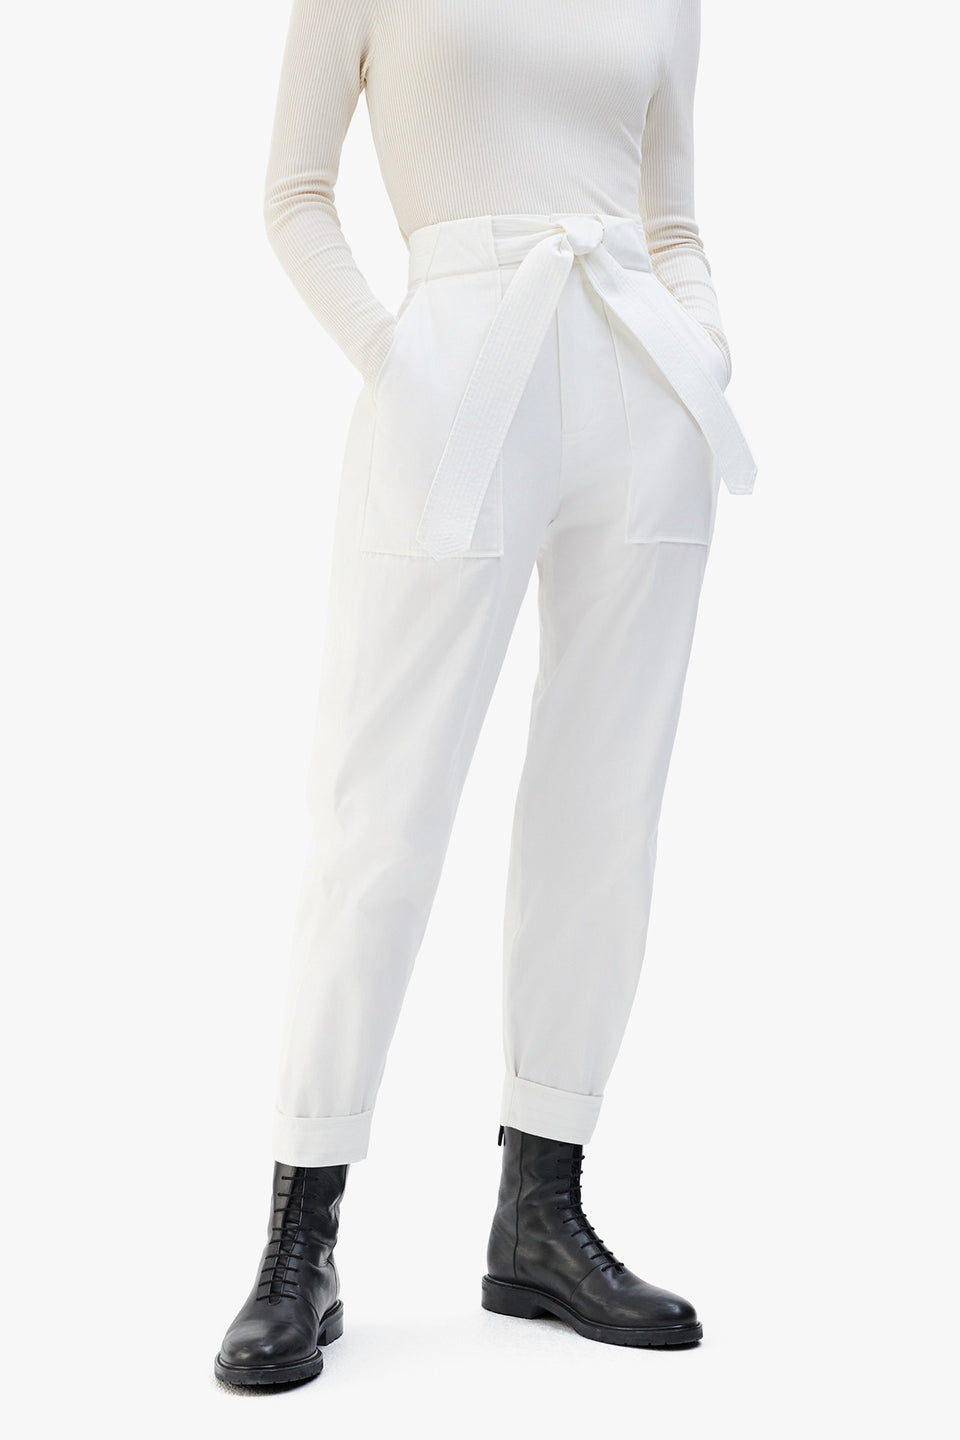 Utility Tapered Trouser - White (listing page thumbnail)